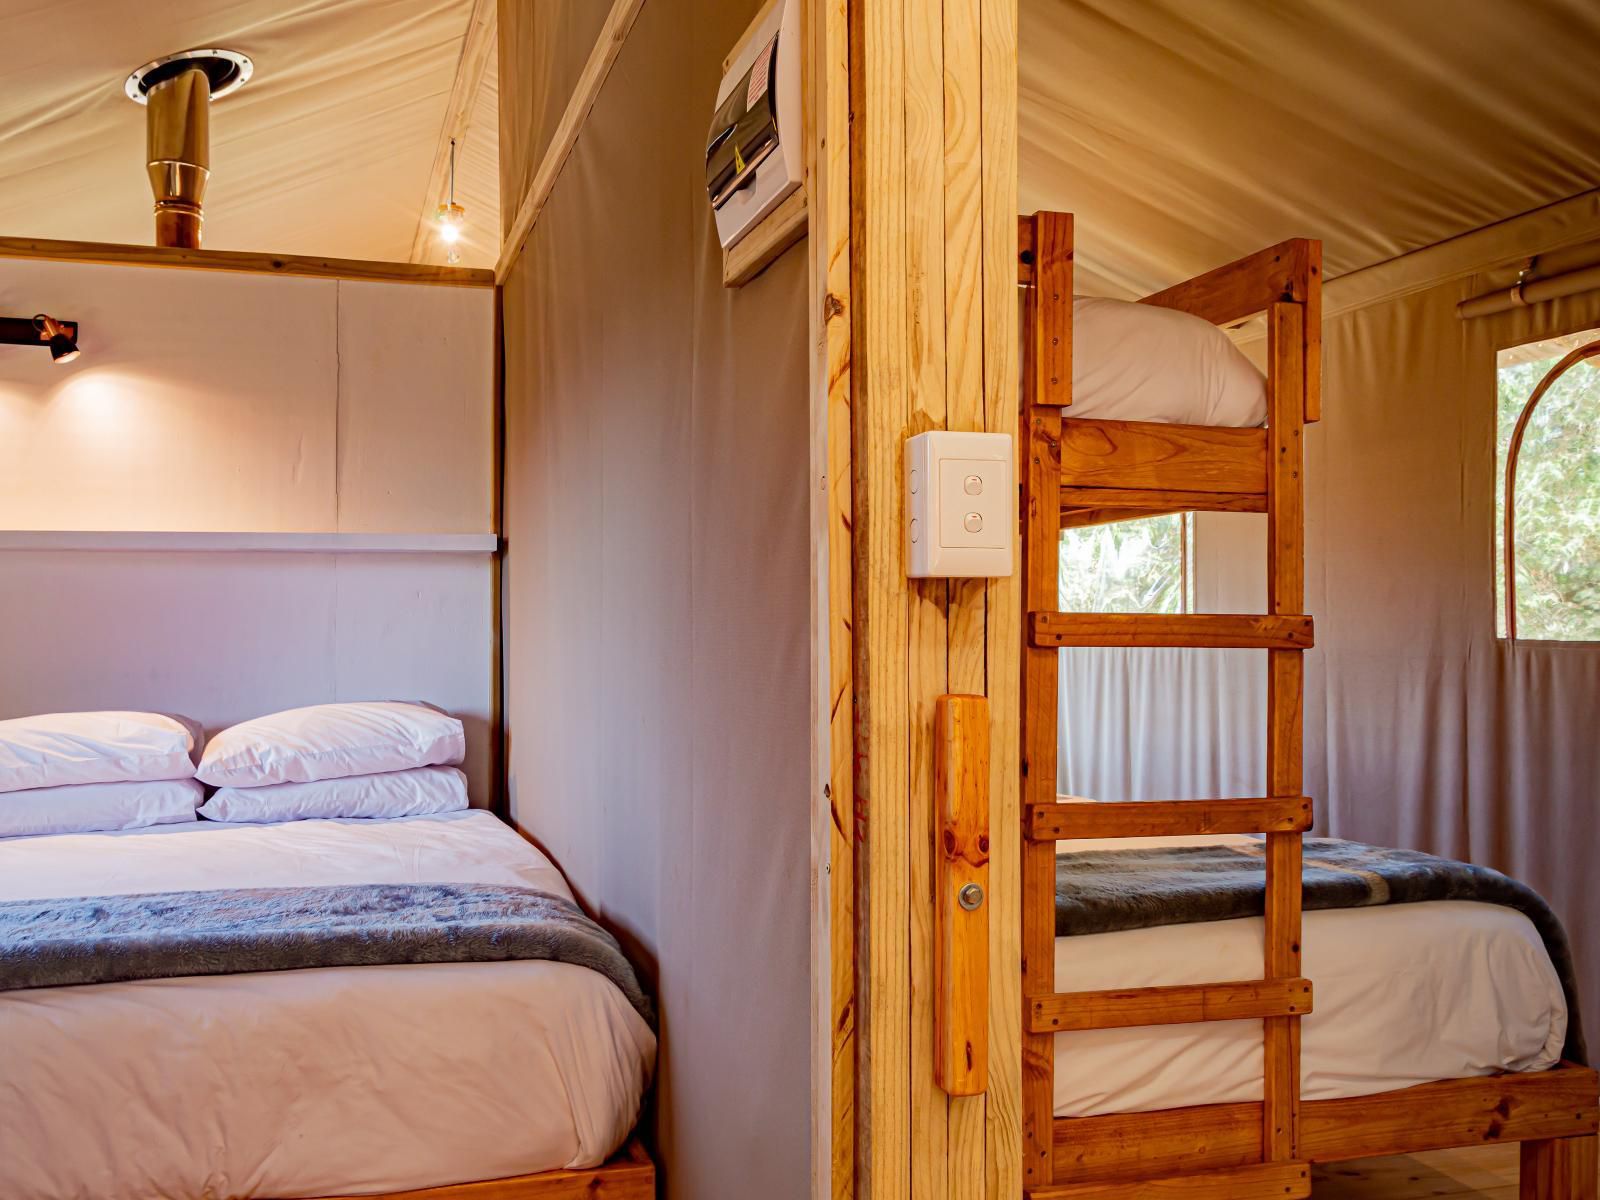 Africamps At Ingwe The Crags Western Cape South Africa Tent, Architecture, Bedroom